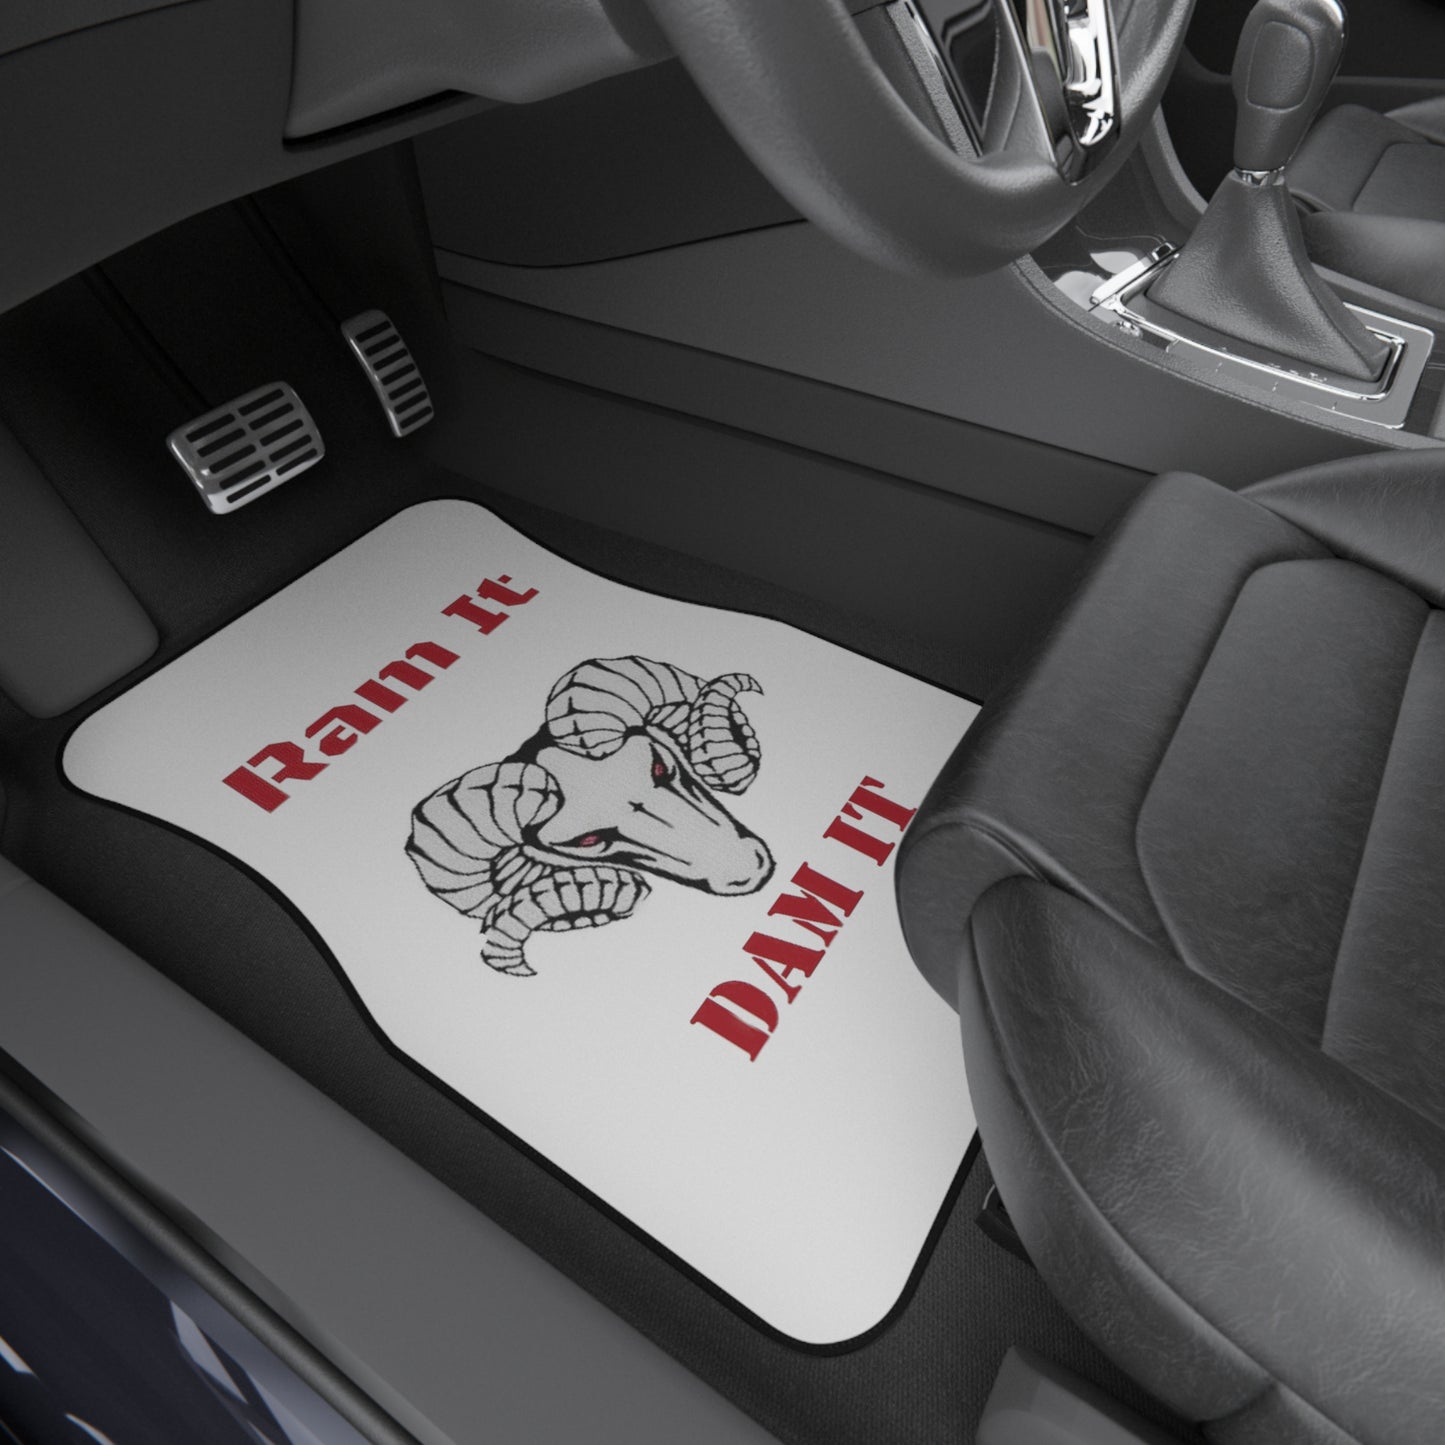 Dodge - Eating Fords - S--tting Chevys Car Mats (Set of 4)